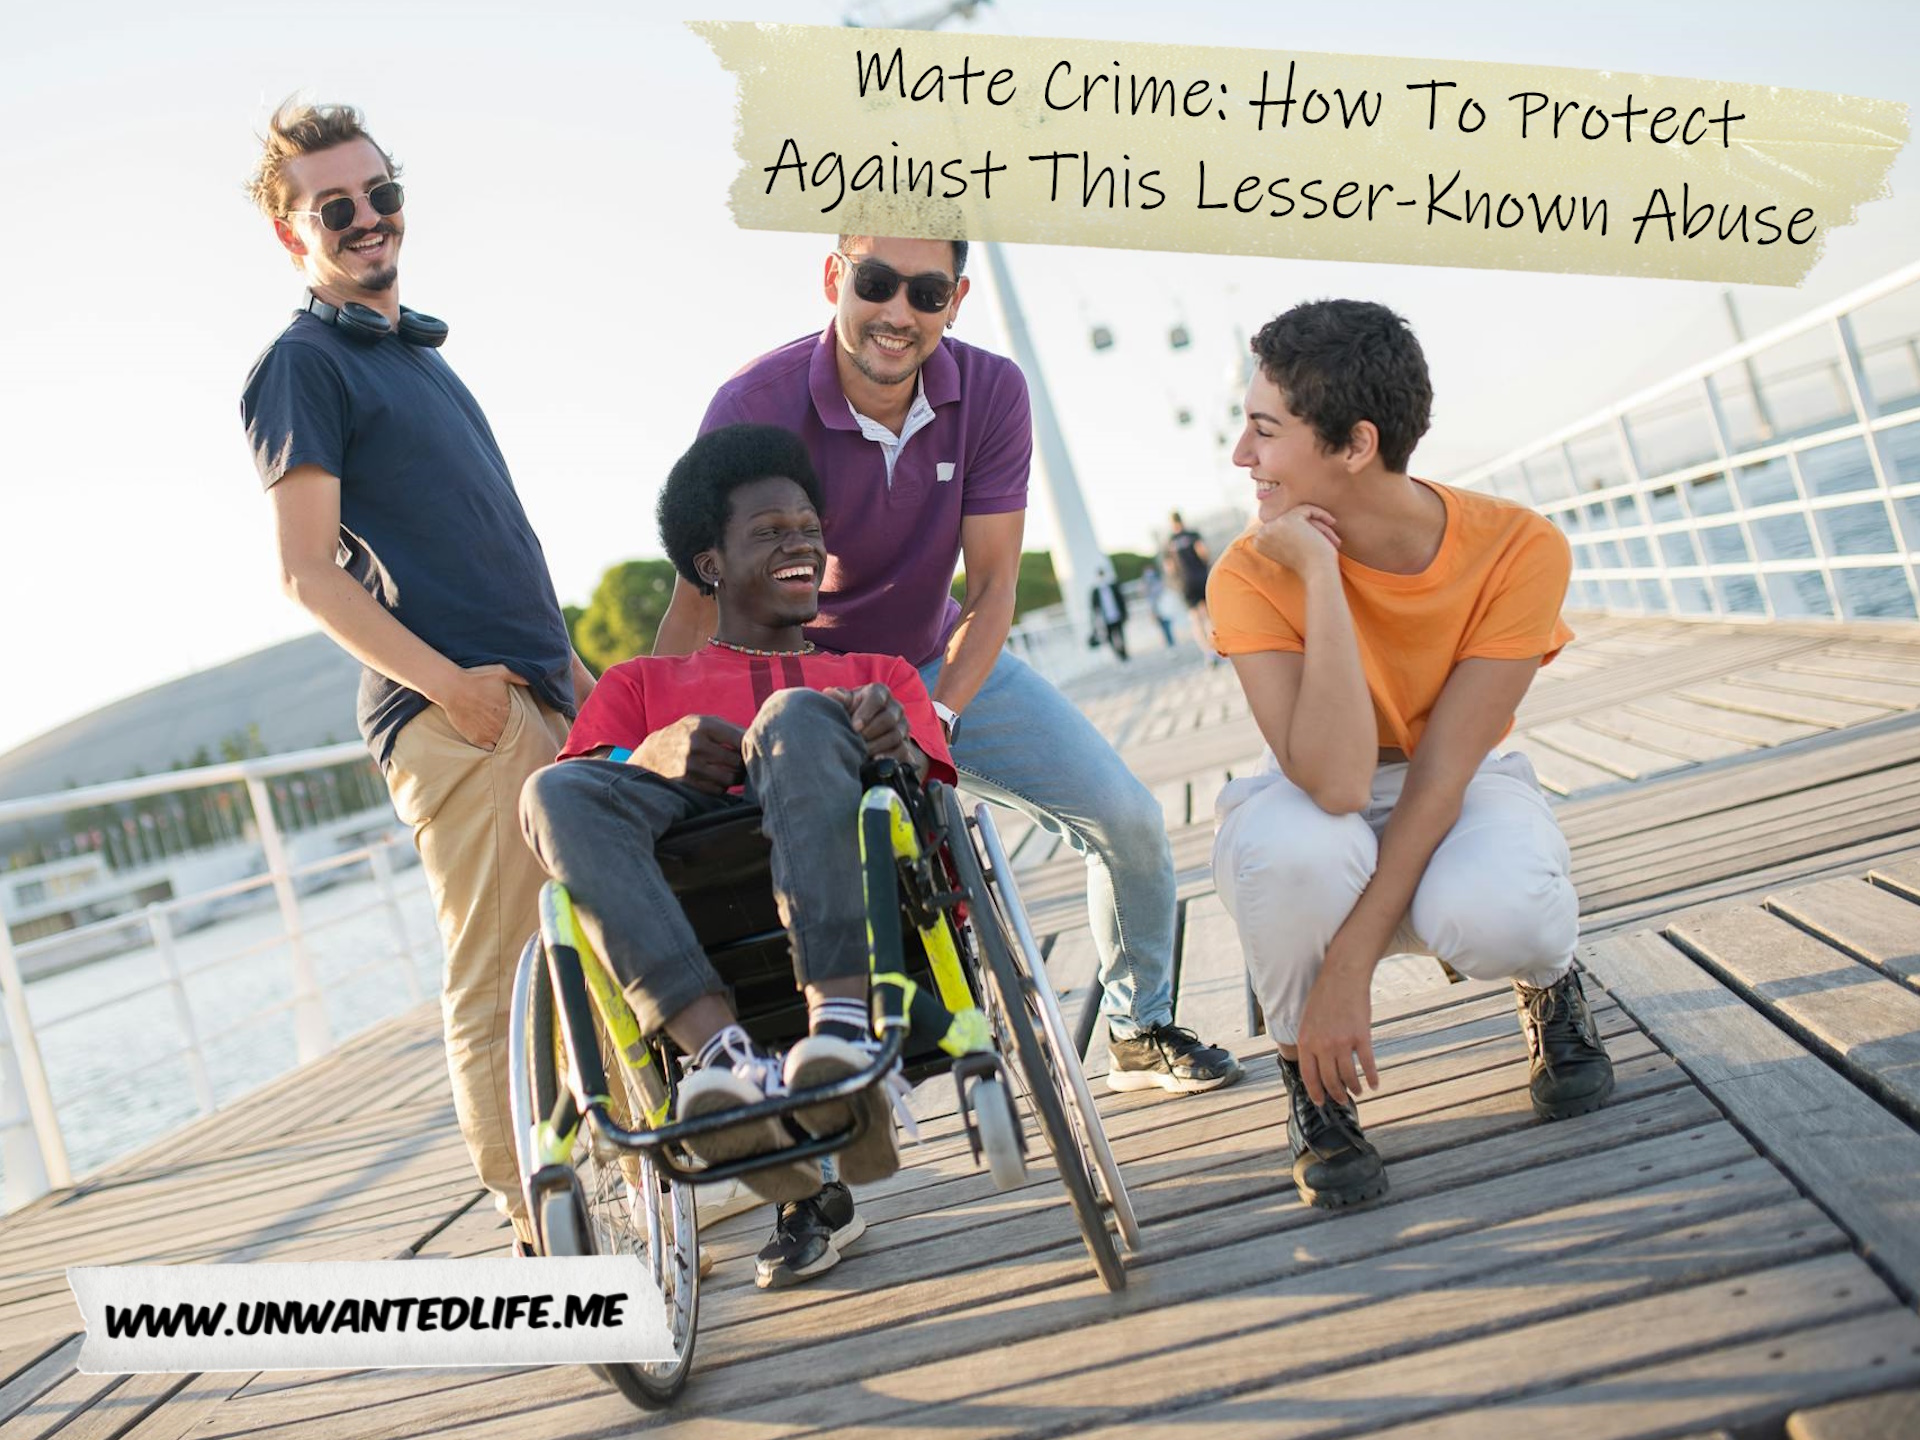 A photo of a Black man in a wheelchair with three White male friends who are tipping his wheelchair, to represent the topic of the article - Mate Crime: How To Protect Against This Lesser-Known Abuse